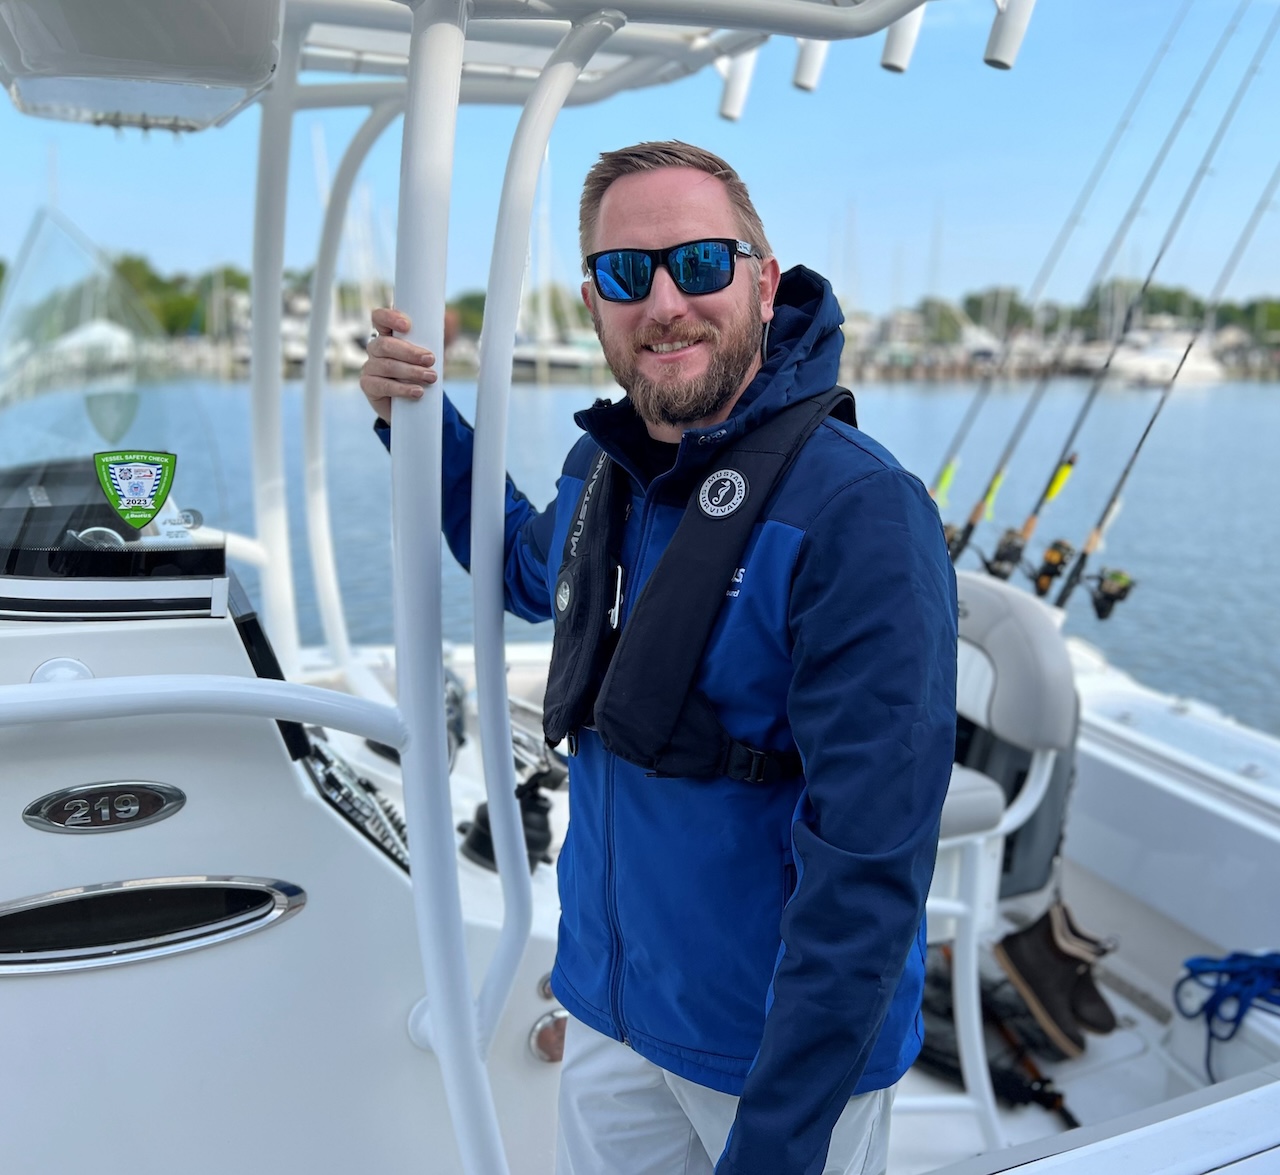 BoatUS Foundation’s Alan Dennison Elected Chairman of National Safe Boating Council